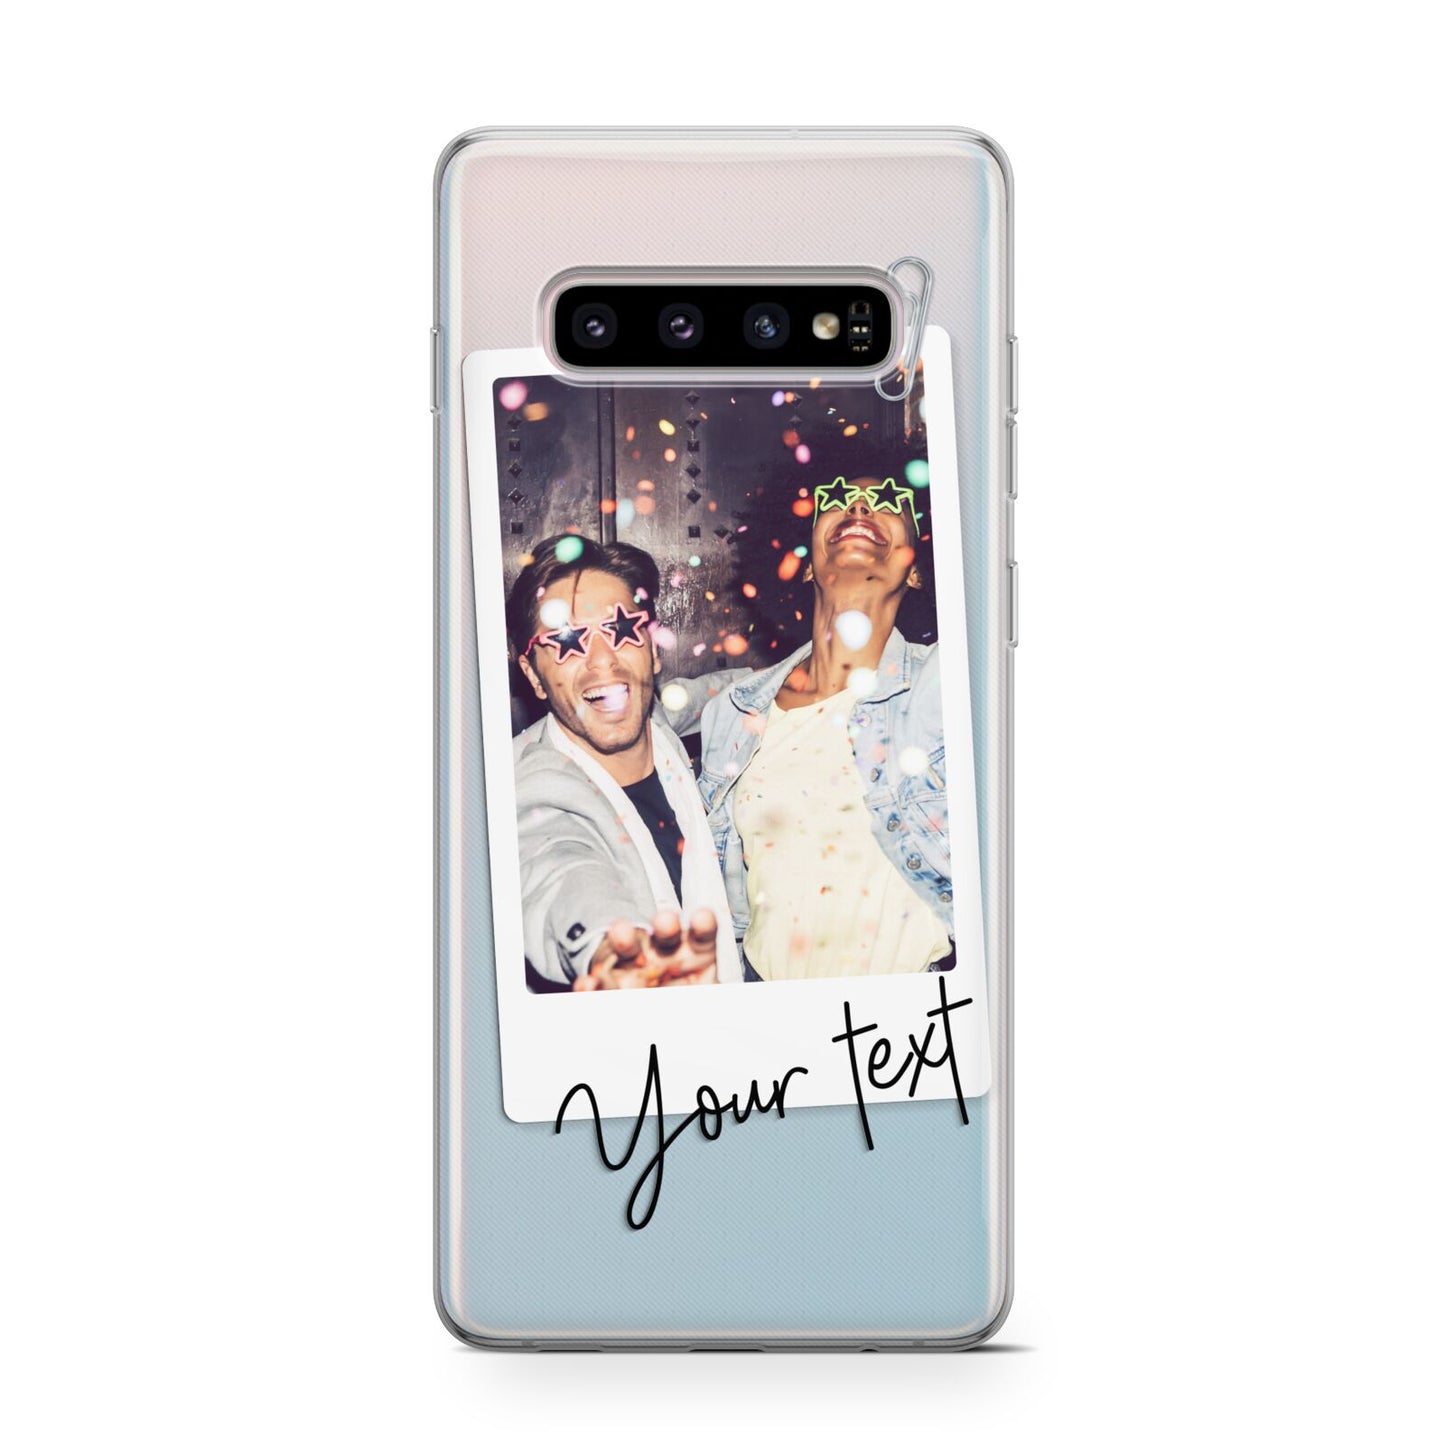 Personalised Photo with Text Samsung Galaxy S10 Case